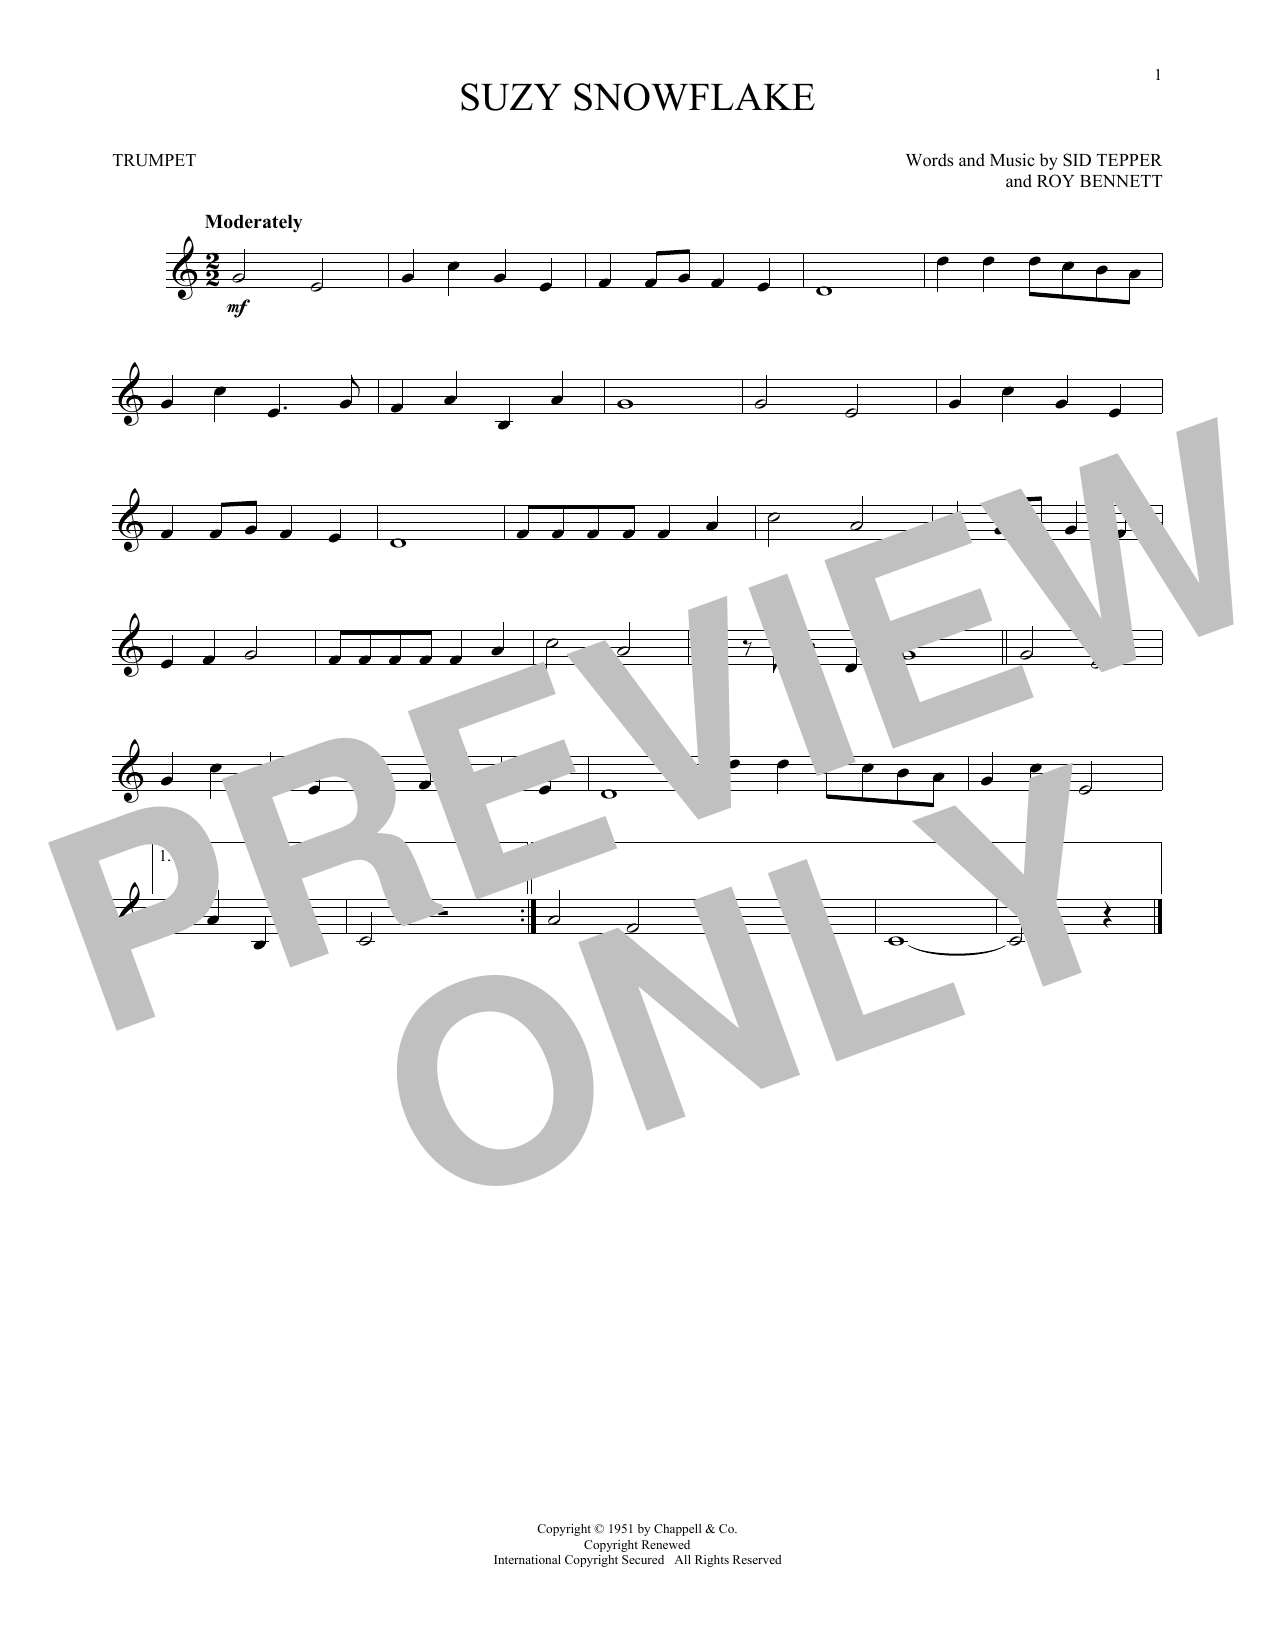 Download Sid Tepper and Roy Bennett Suzy Snowflake Sheet Music